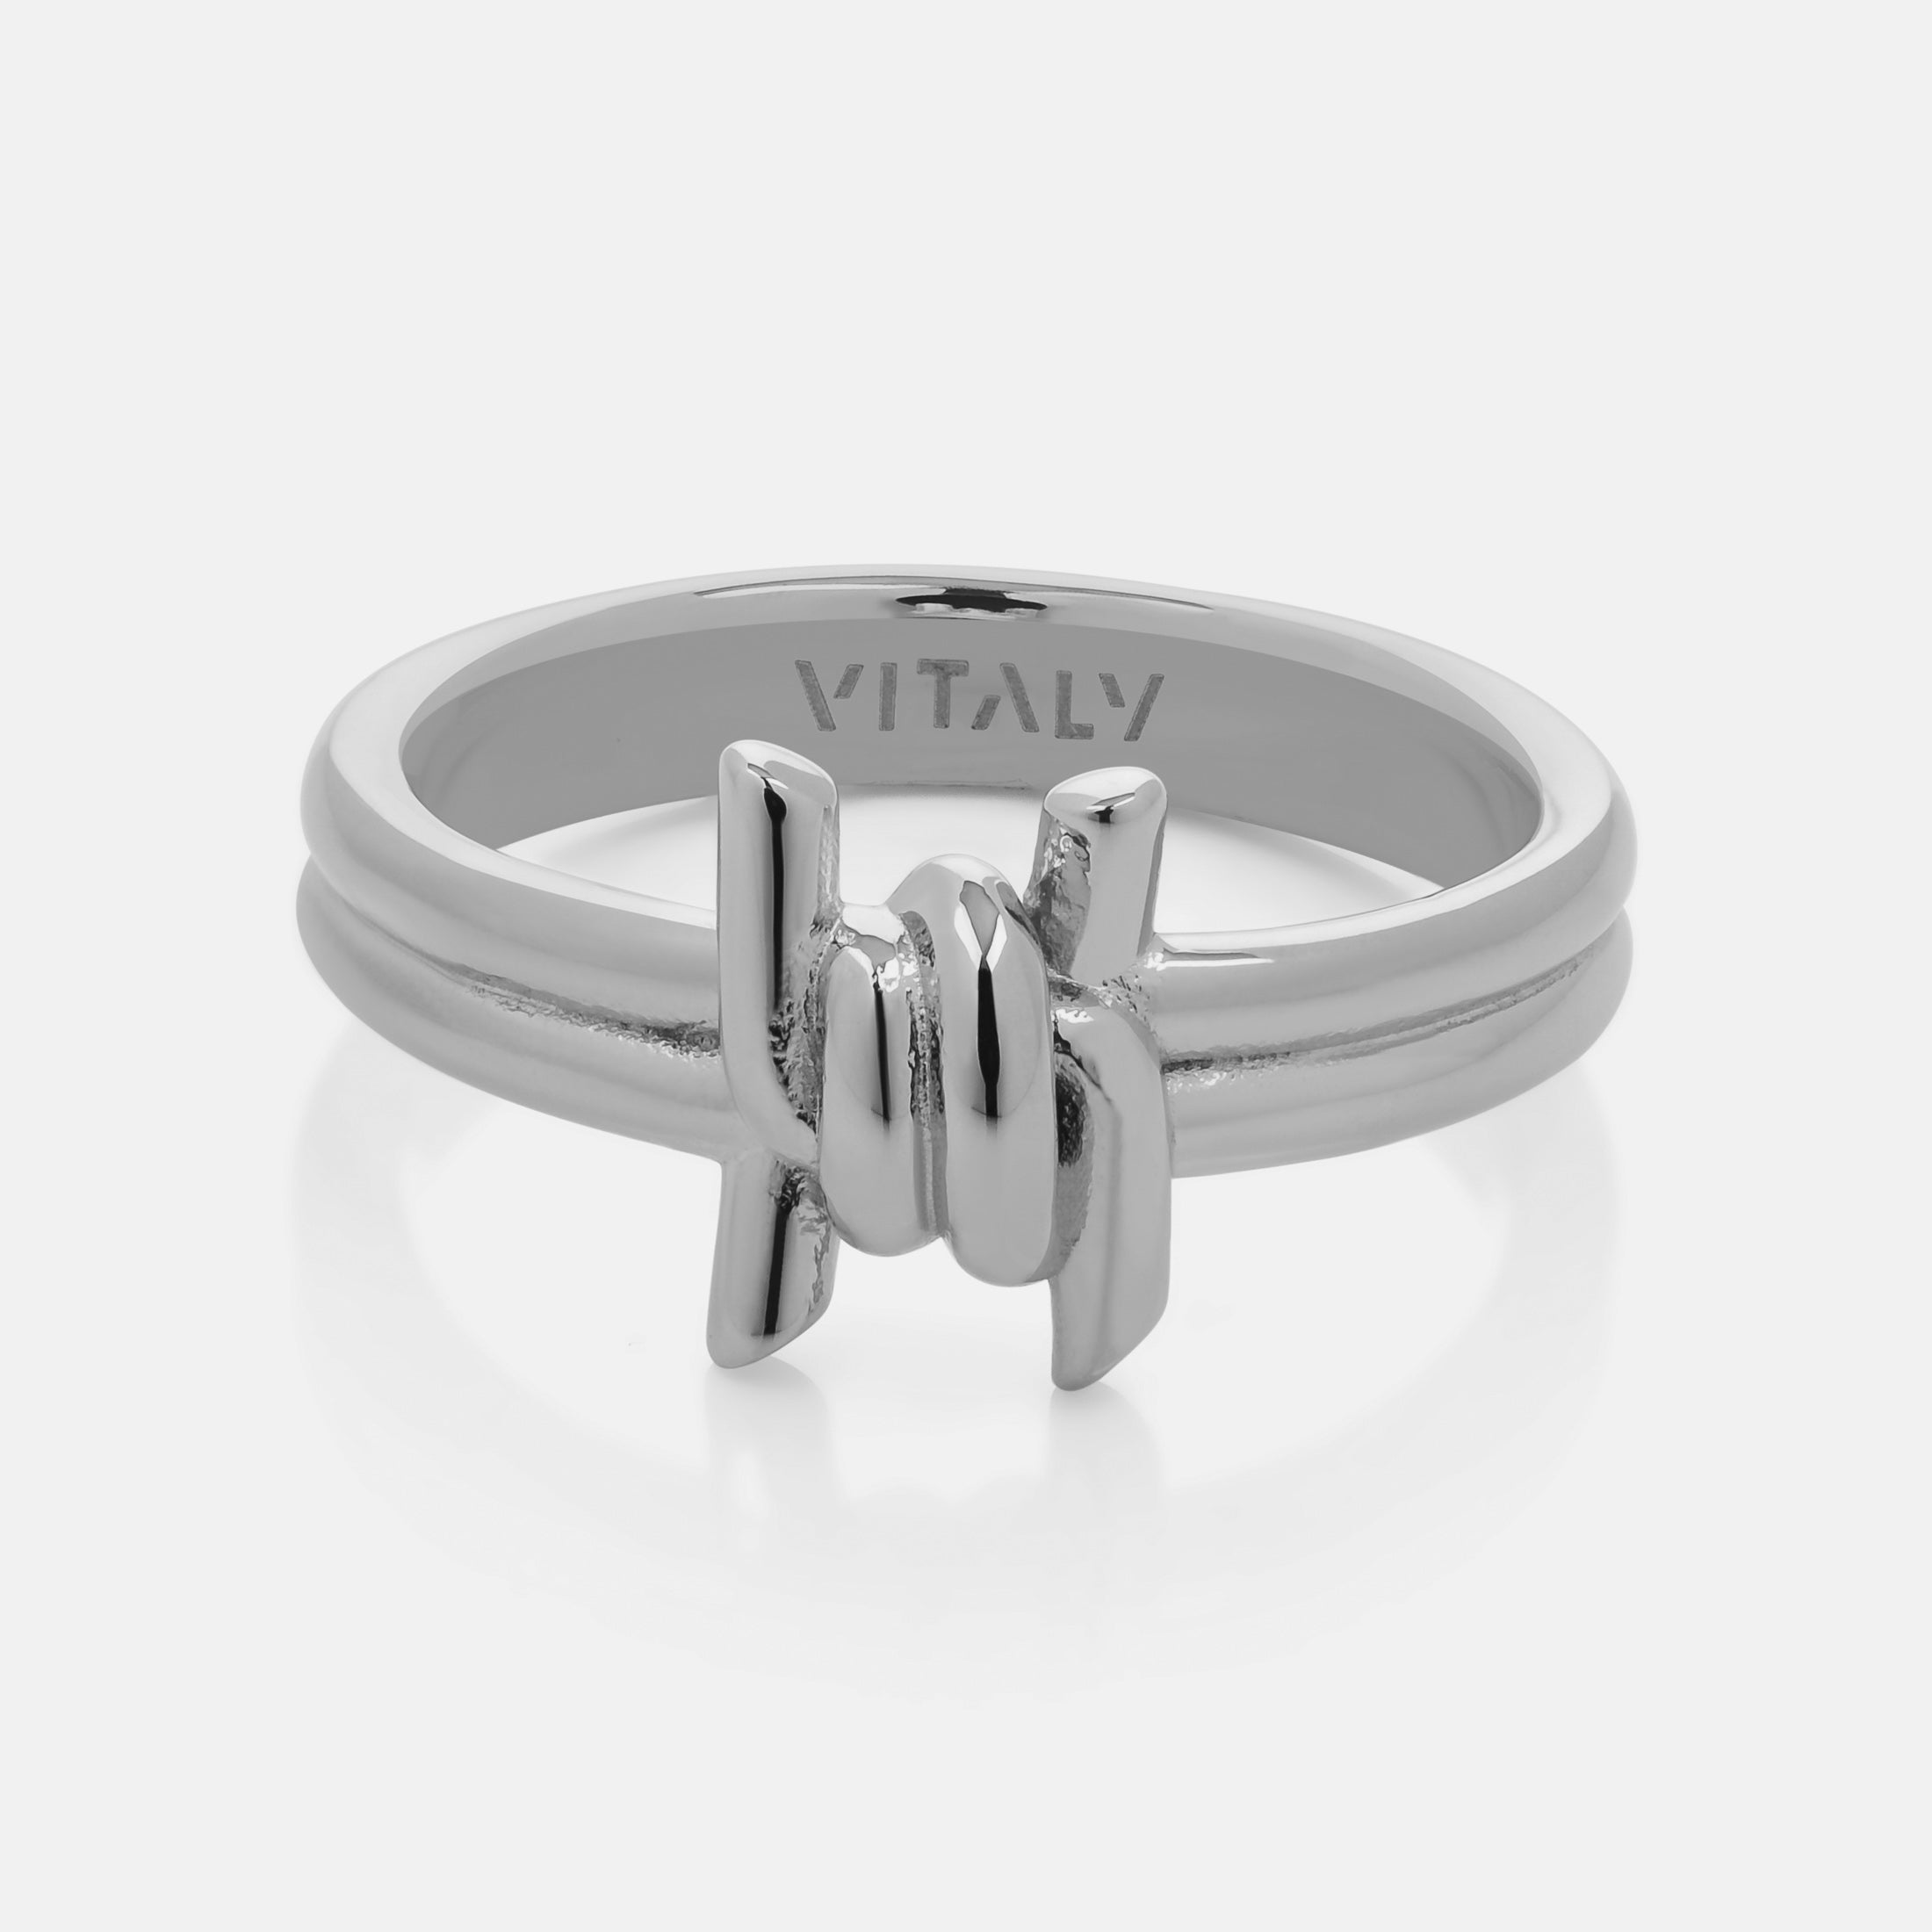 Vitaly Perimeter Ring | 100% Recycled Stainless Steel Accessories